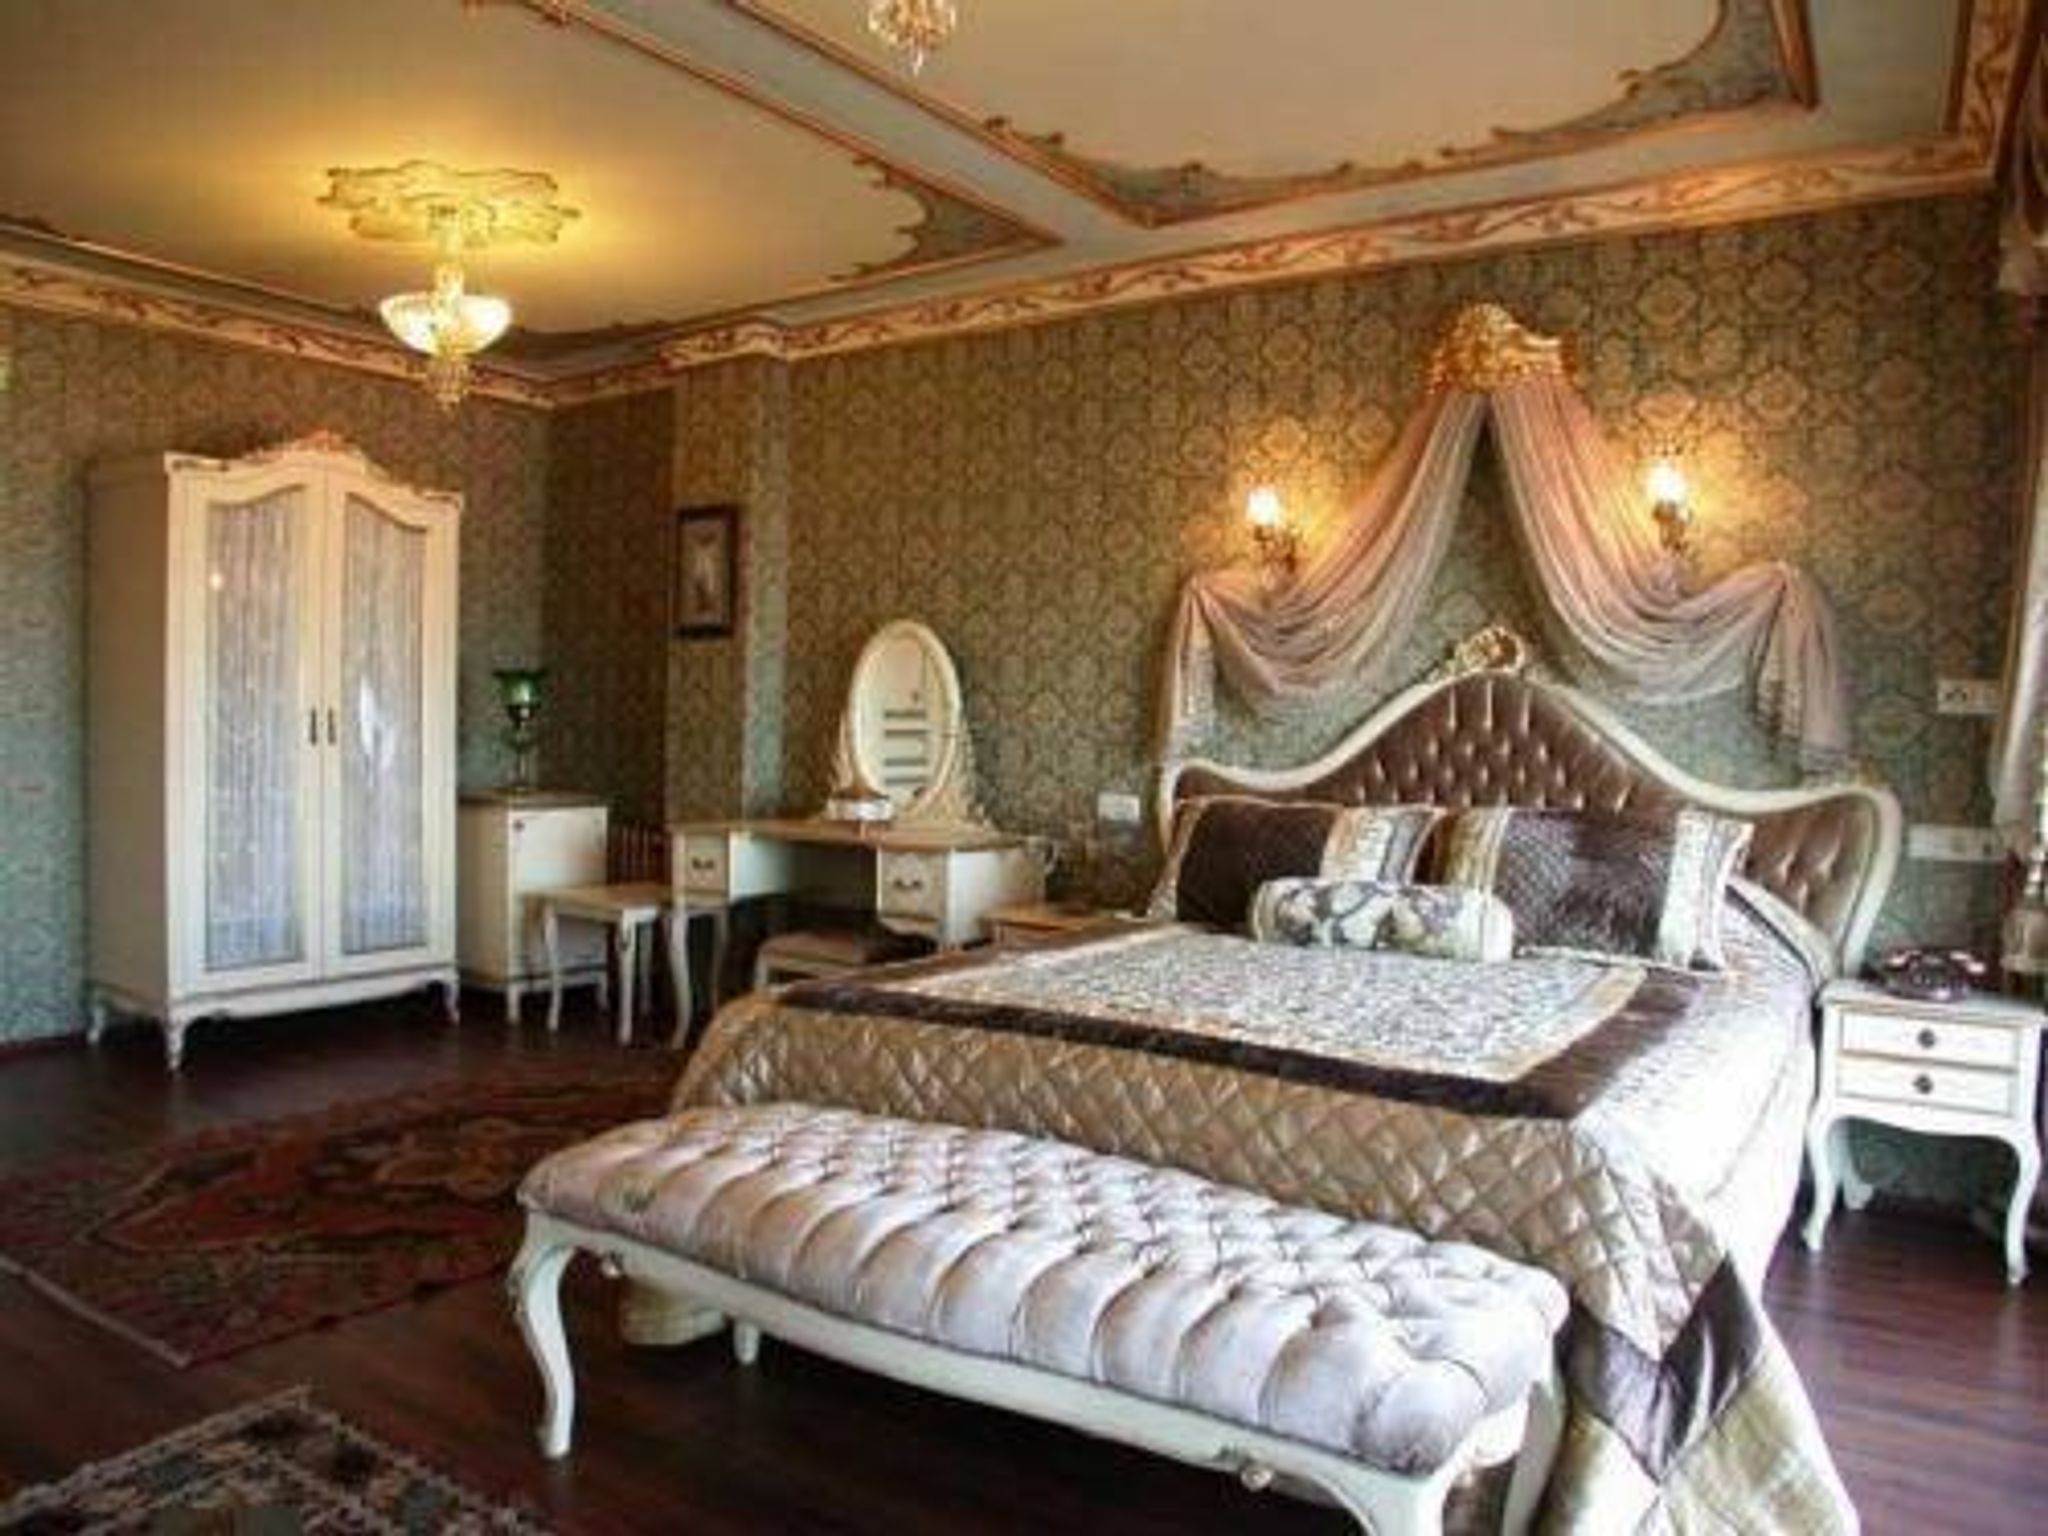 Dolmabahce Suite Room